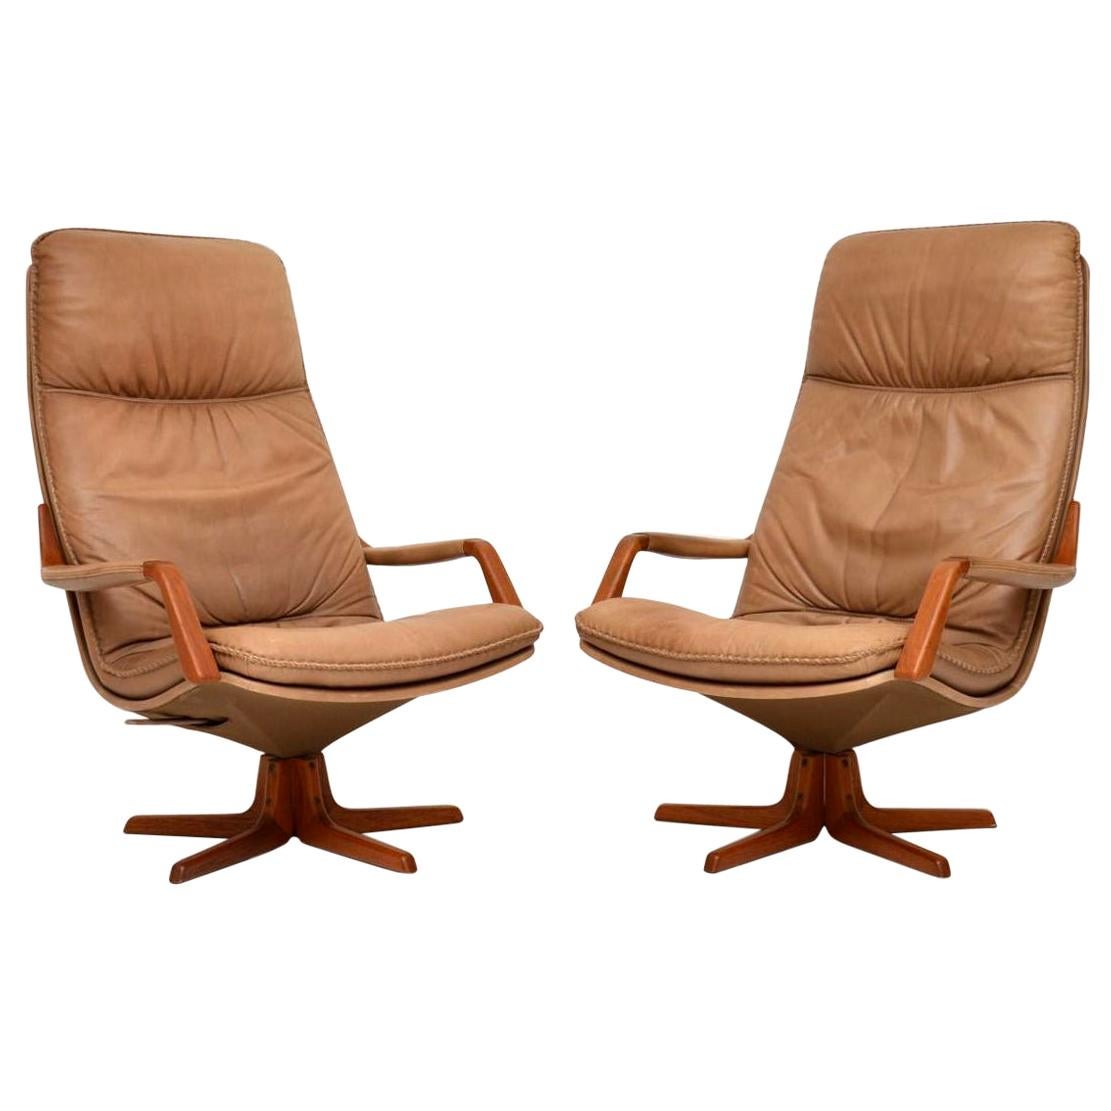 1970s Pair of Danish Leather and Teak Reclining Armchairs